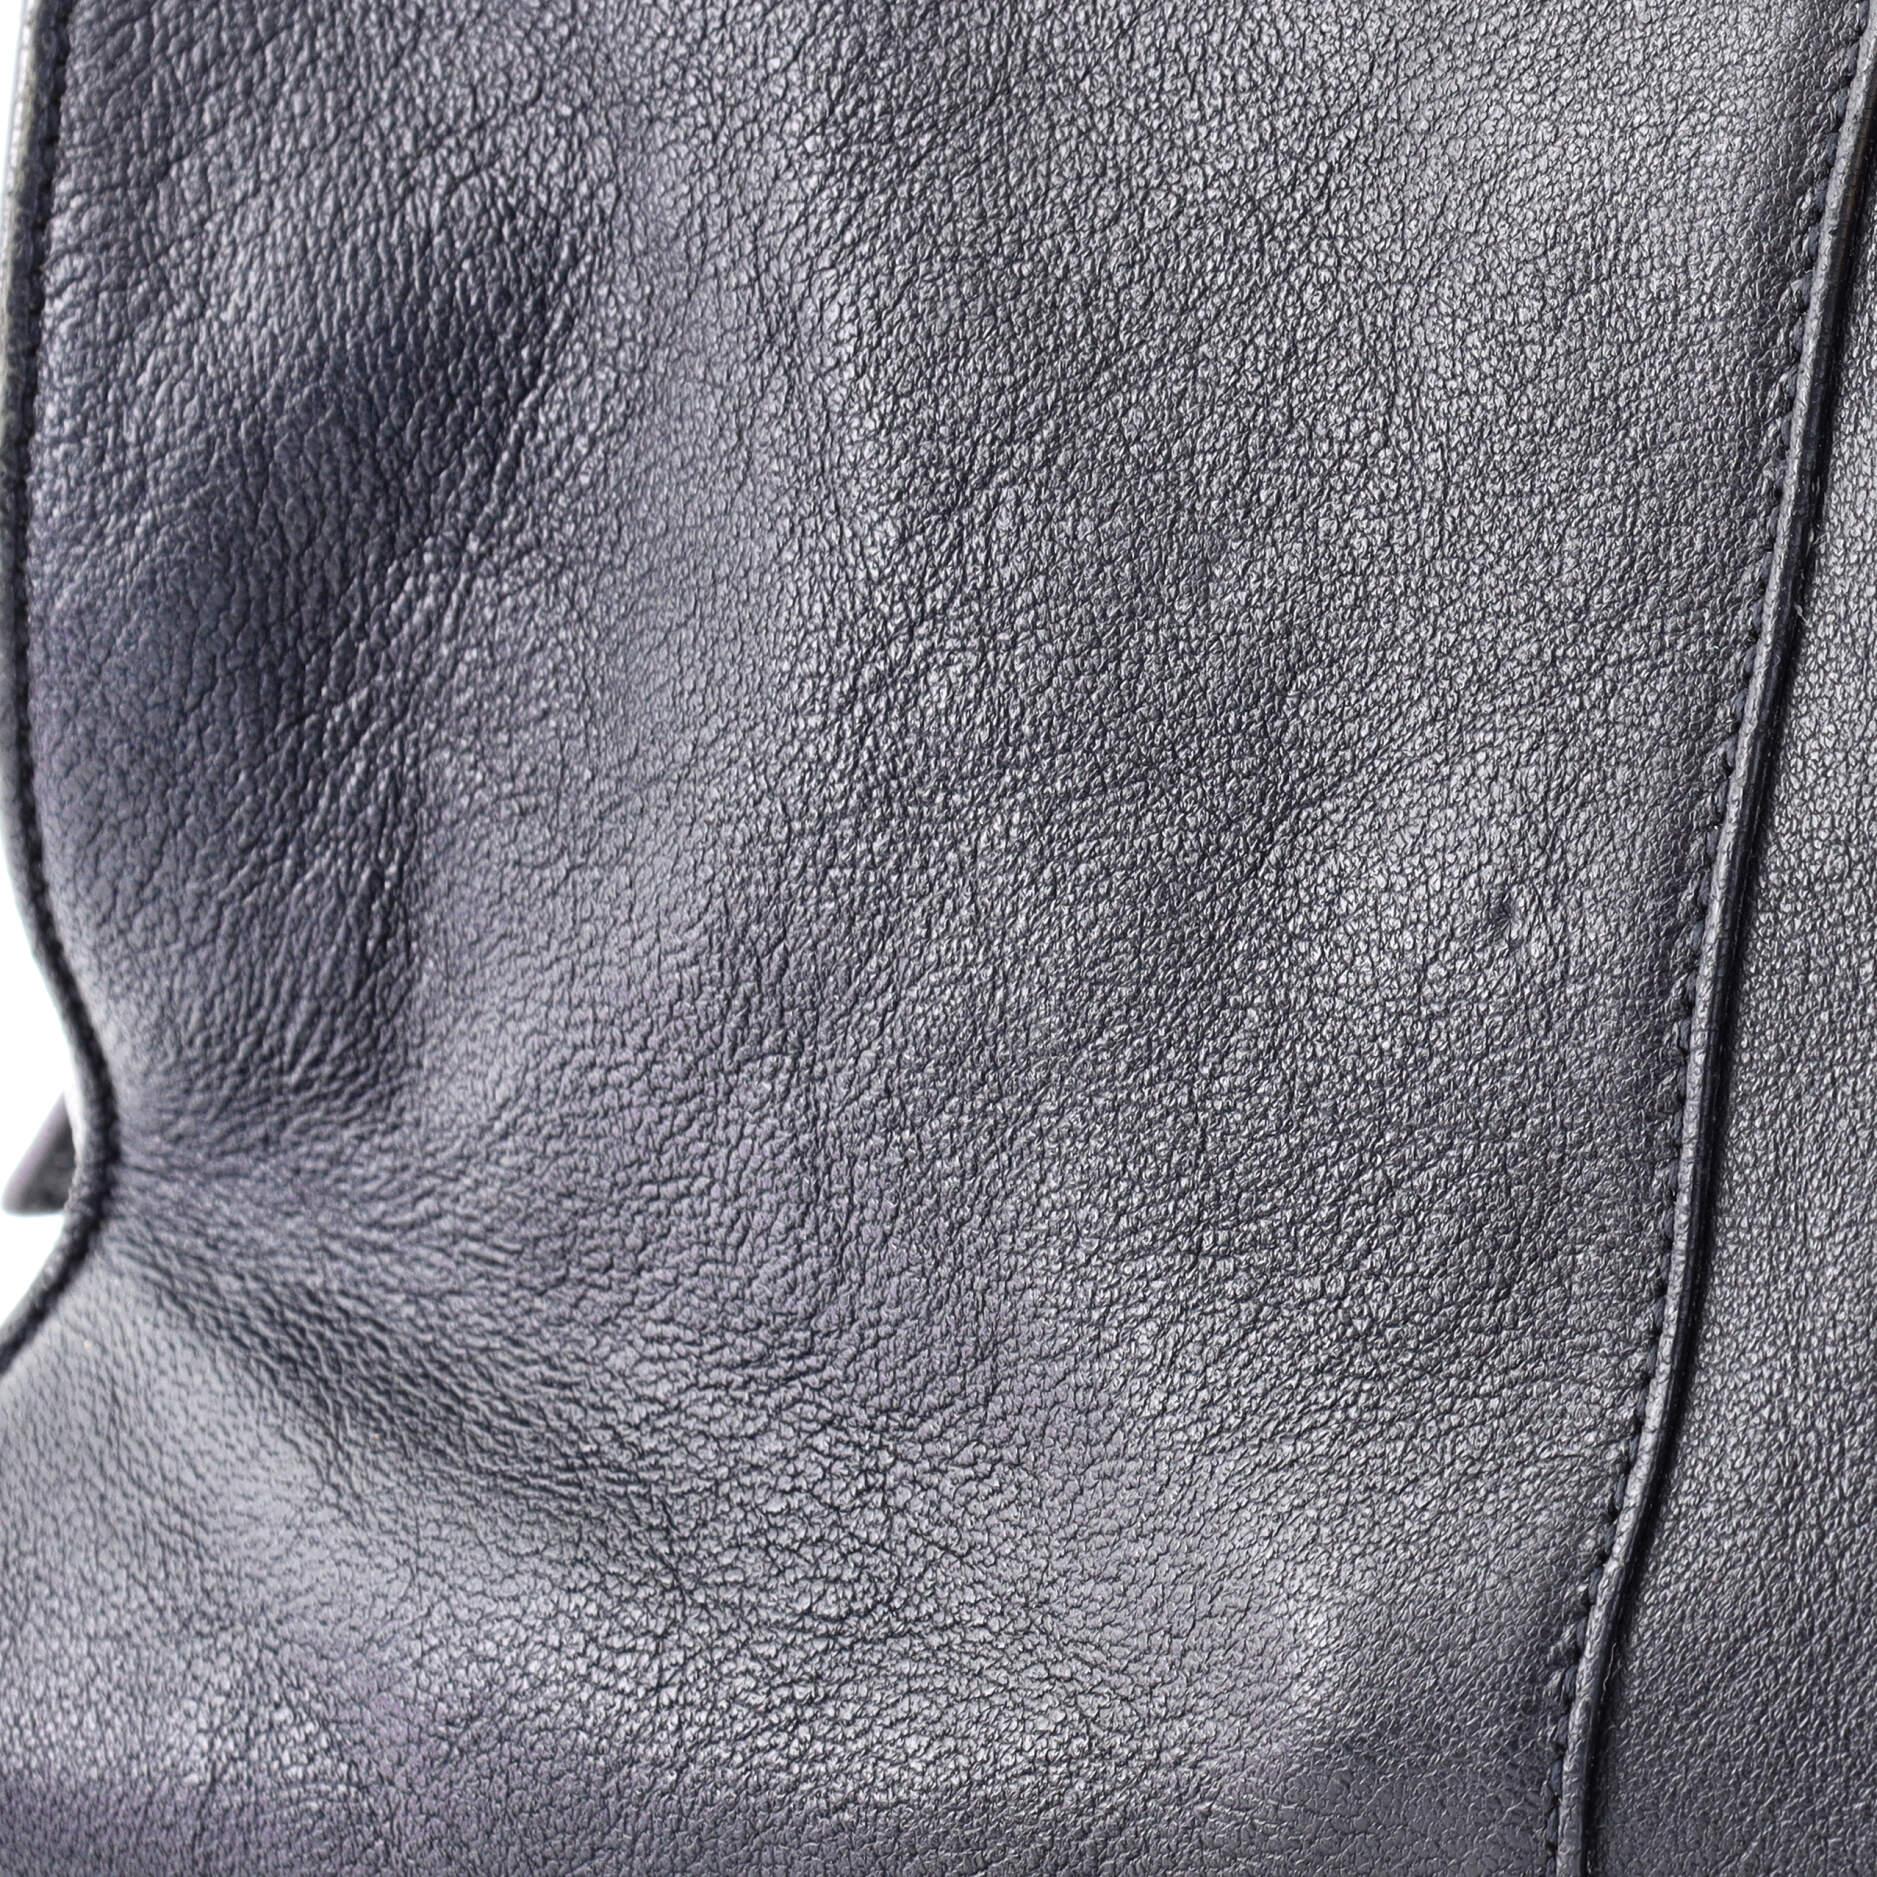 Saint Laurent Chyc Cabas Tote Leather Small 2